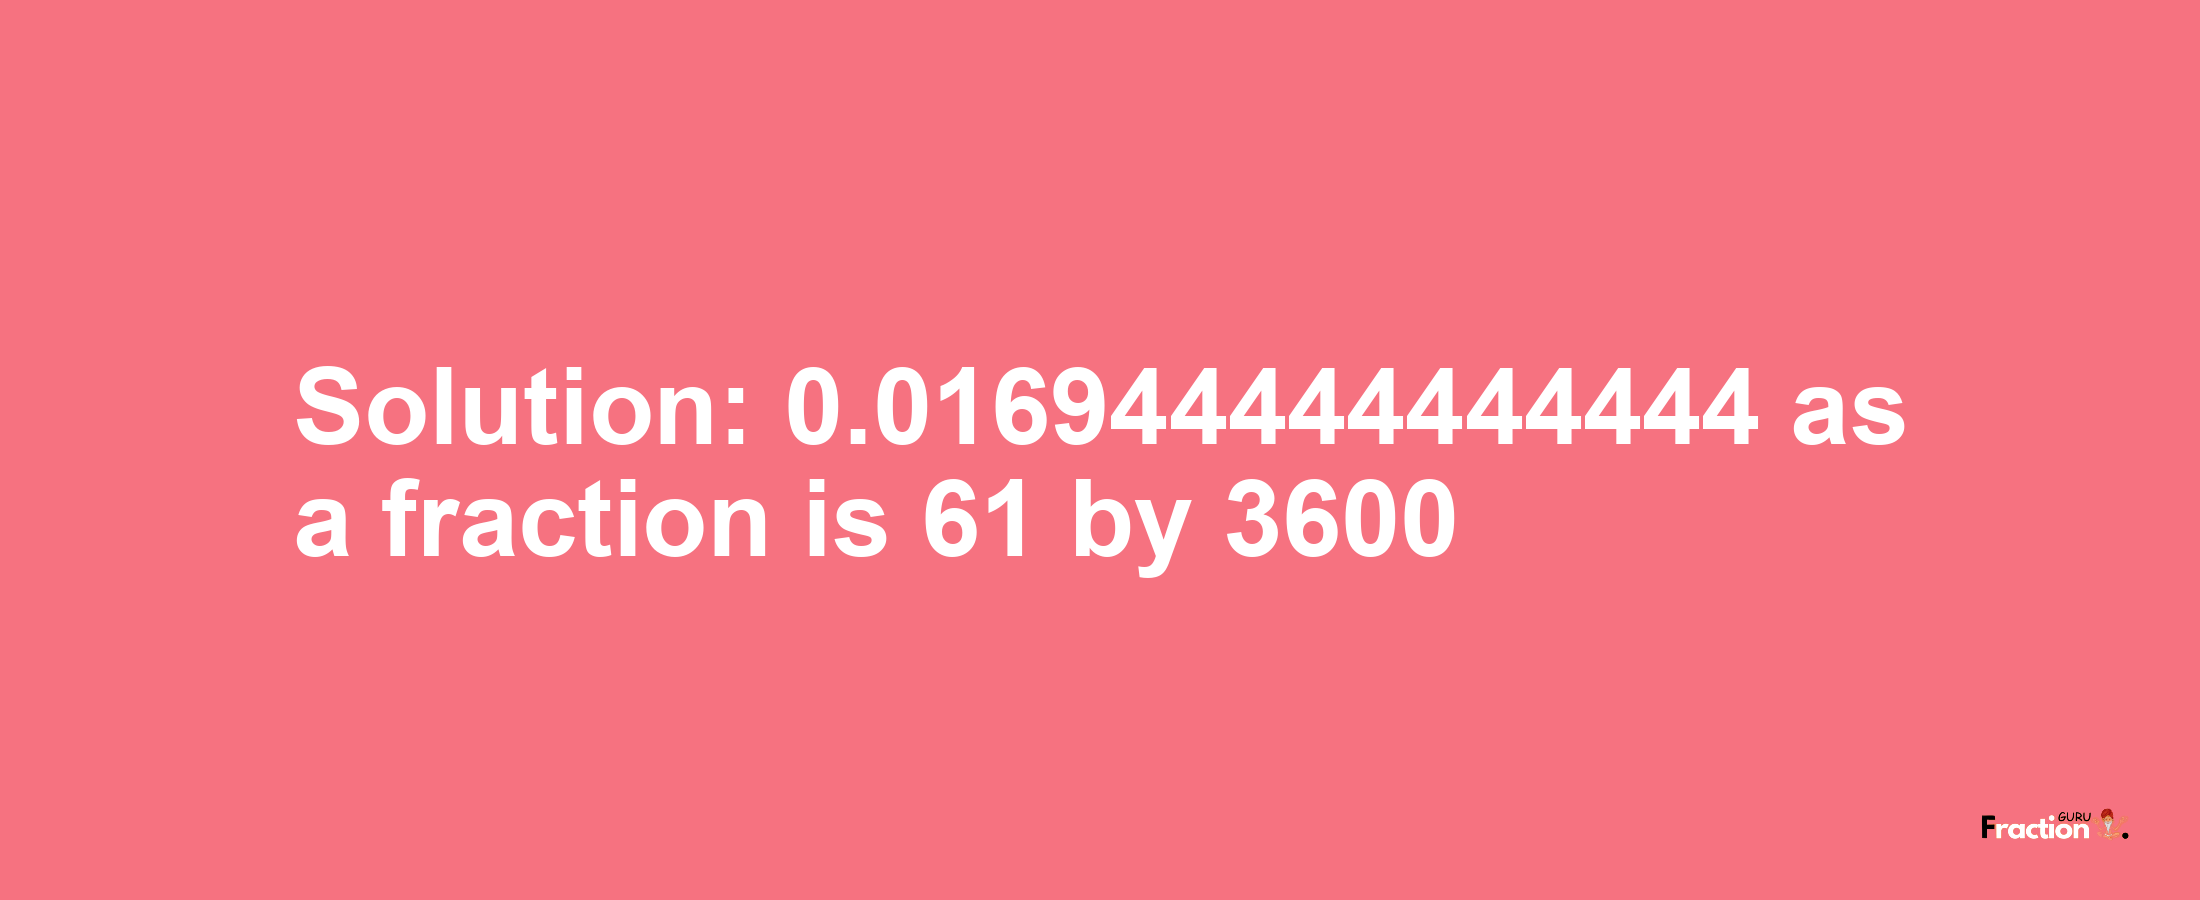 Solution:0.016944444444444 as a fraction is 61/3600